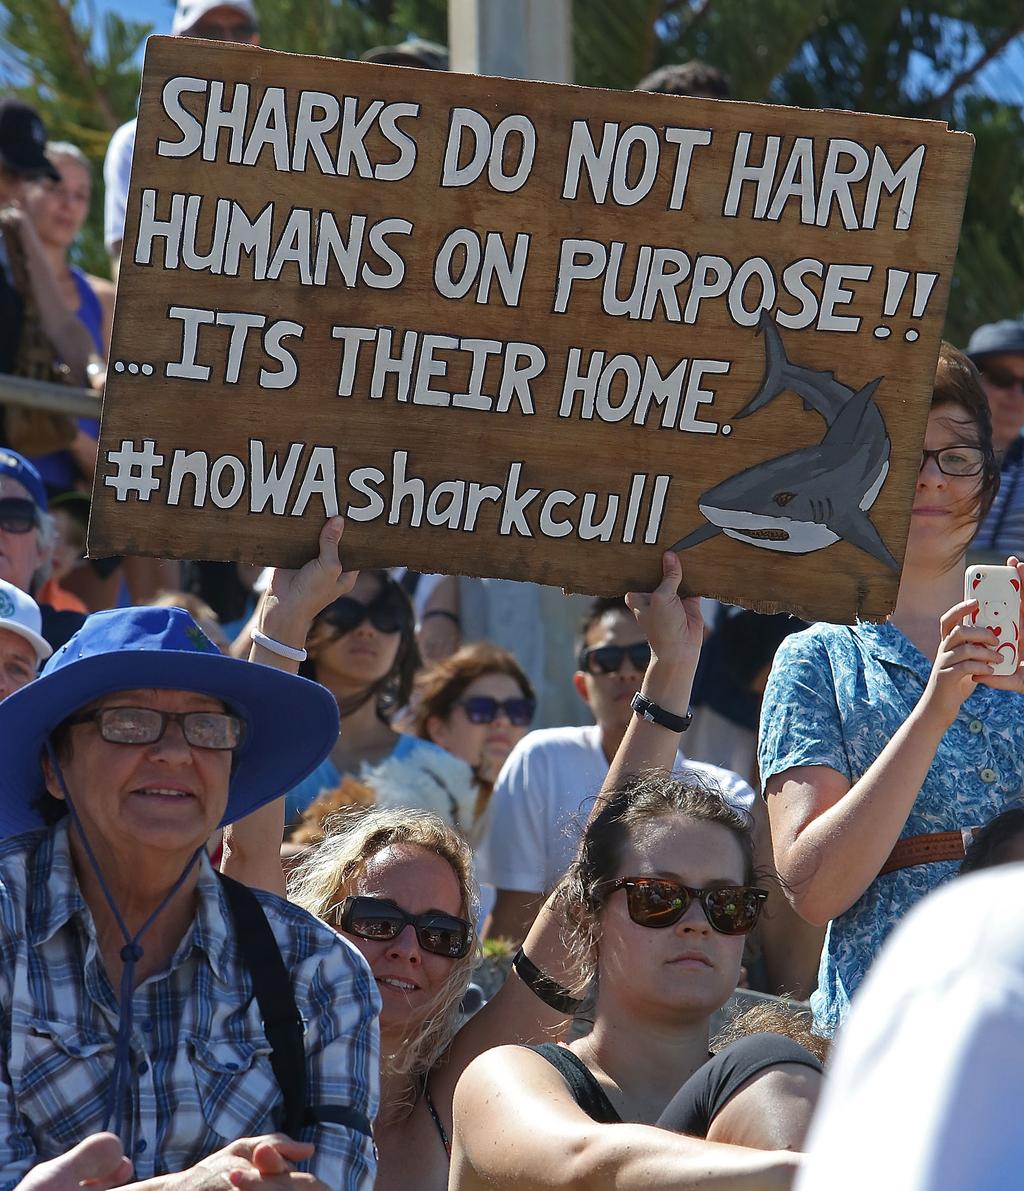 DILEMMA: IS IT RIGHT TO PROTECT PEOPLE BY CULLING SHARKS? THE DILEMMA Friday 19 May 2017 Sharks and their relationship with humans have been in the news lately after a number of recent attacks.